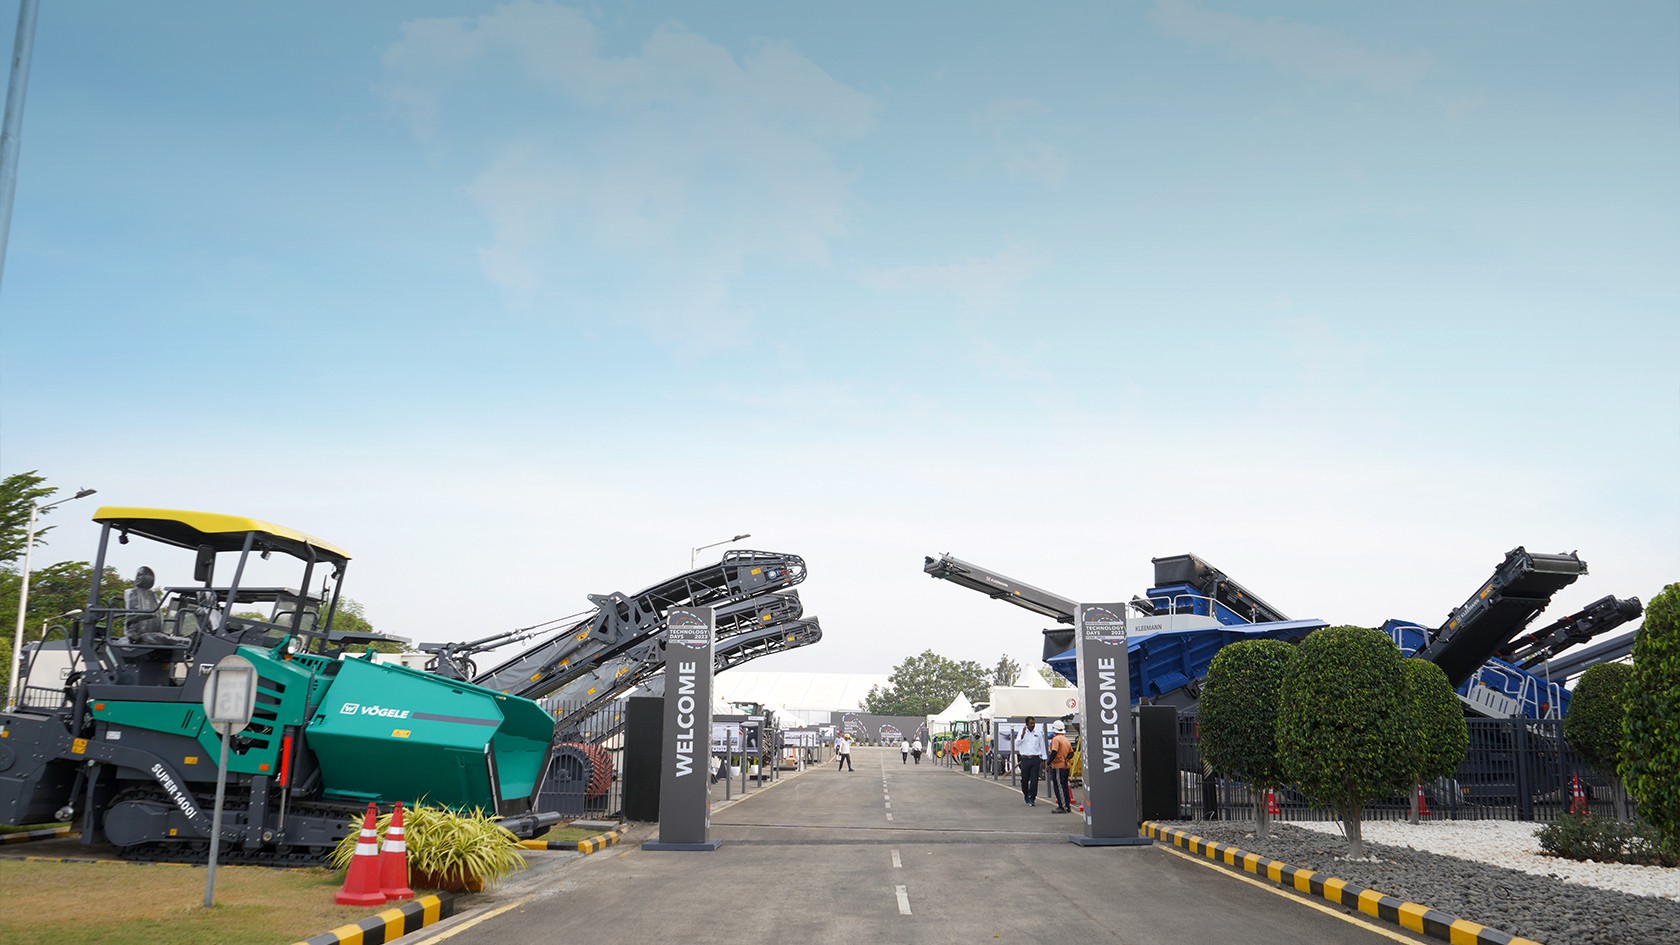 Entrance to the Technology Days at the Wirtgen Group India